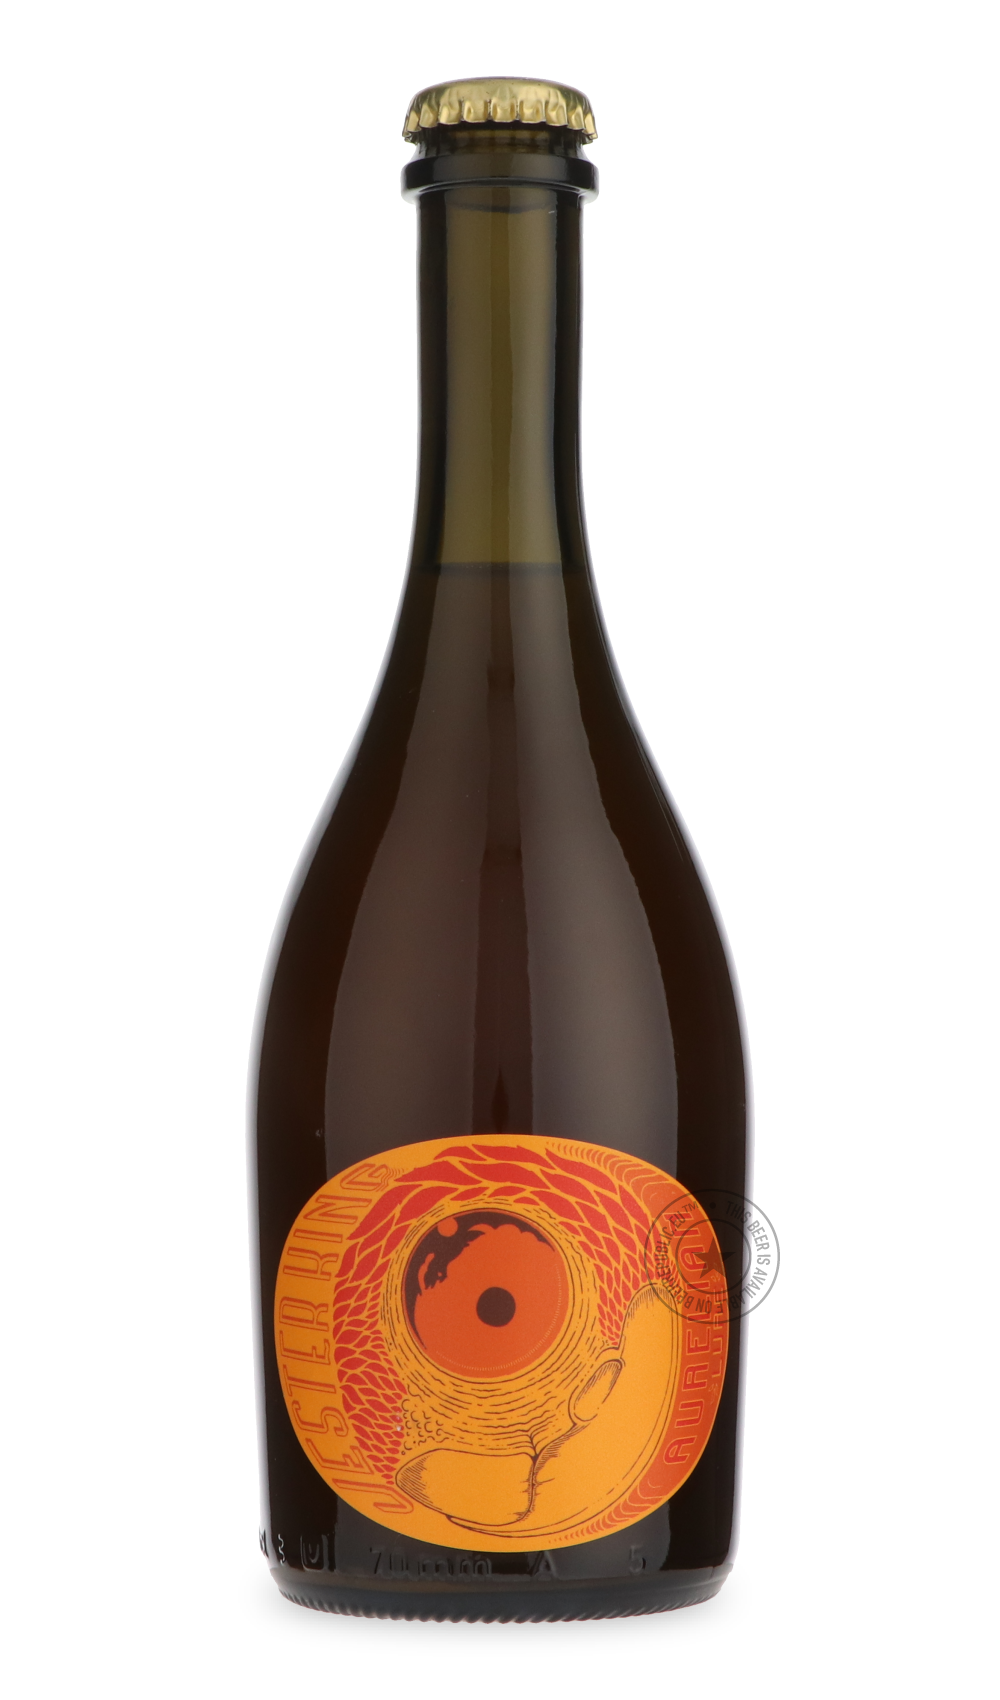 -Jester King- Aurelian Lure-Sour / Wild & Fruity- Only @ Beer Republic - The best online beer store for American & Canadian craft beer - Buy beer online from the USA and Canada - Bier online kopen - Amerikaans bier kopen - Craft beer store - Craft beer kopen - Amerikanisch bier kaufen - Bier online kaufen - Acheter biere online - IPA - Stout - Porter - New England IPA - Hazy IPA - Imperial Stout - Barrel Aged - Barrel Aged Imperial Stout - Brown - Dark beer - Blond - Blonde - Pilsner - Lager - Wheat - Weize